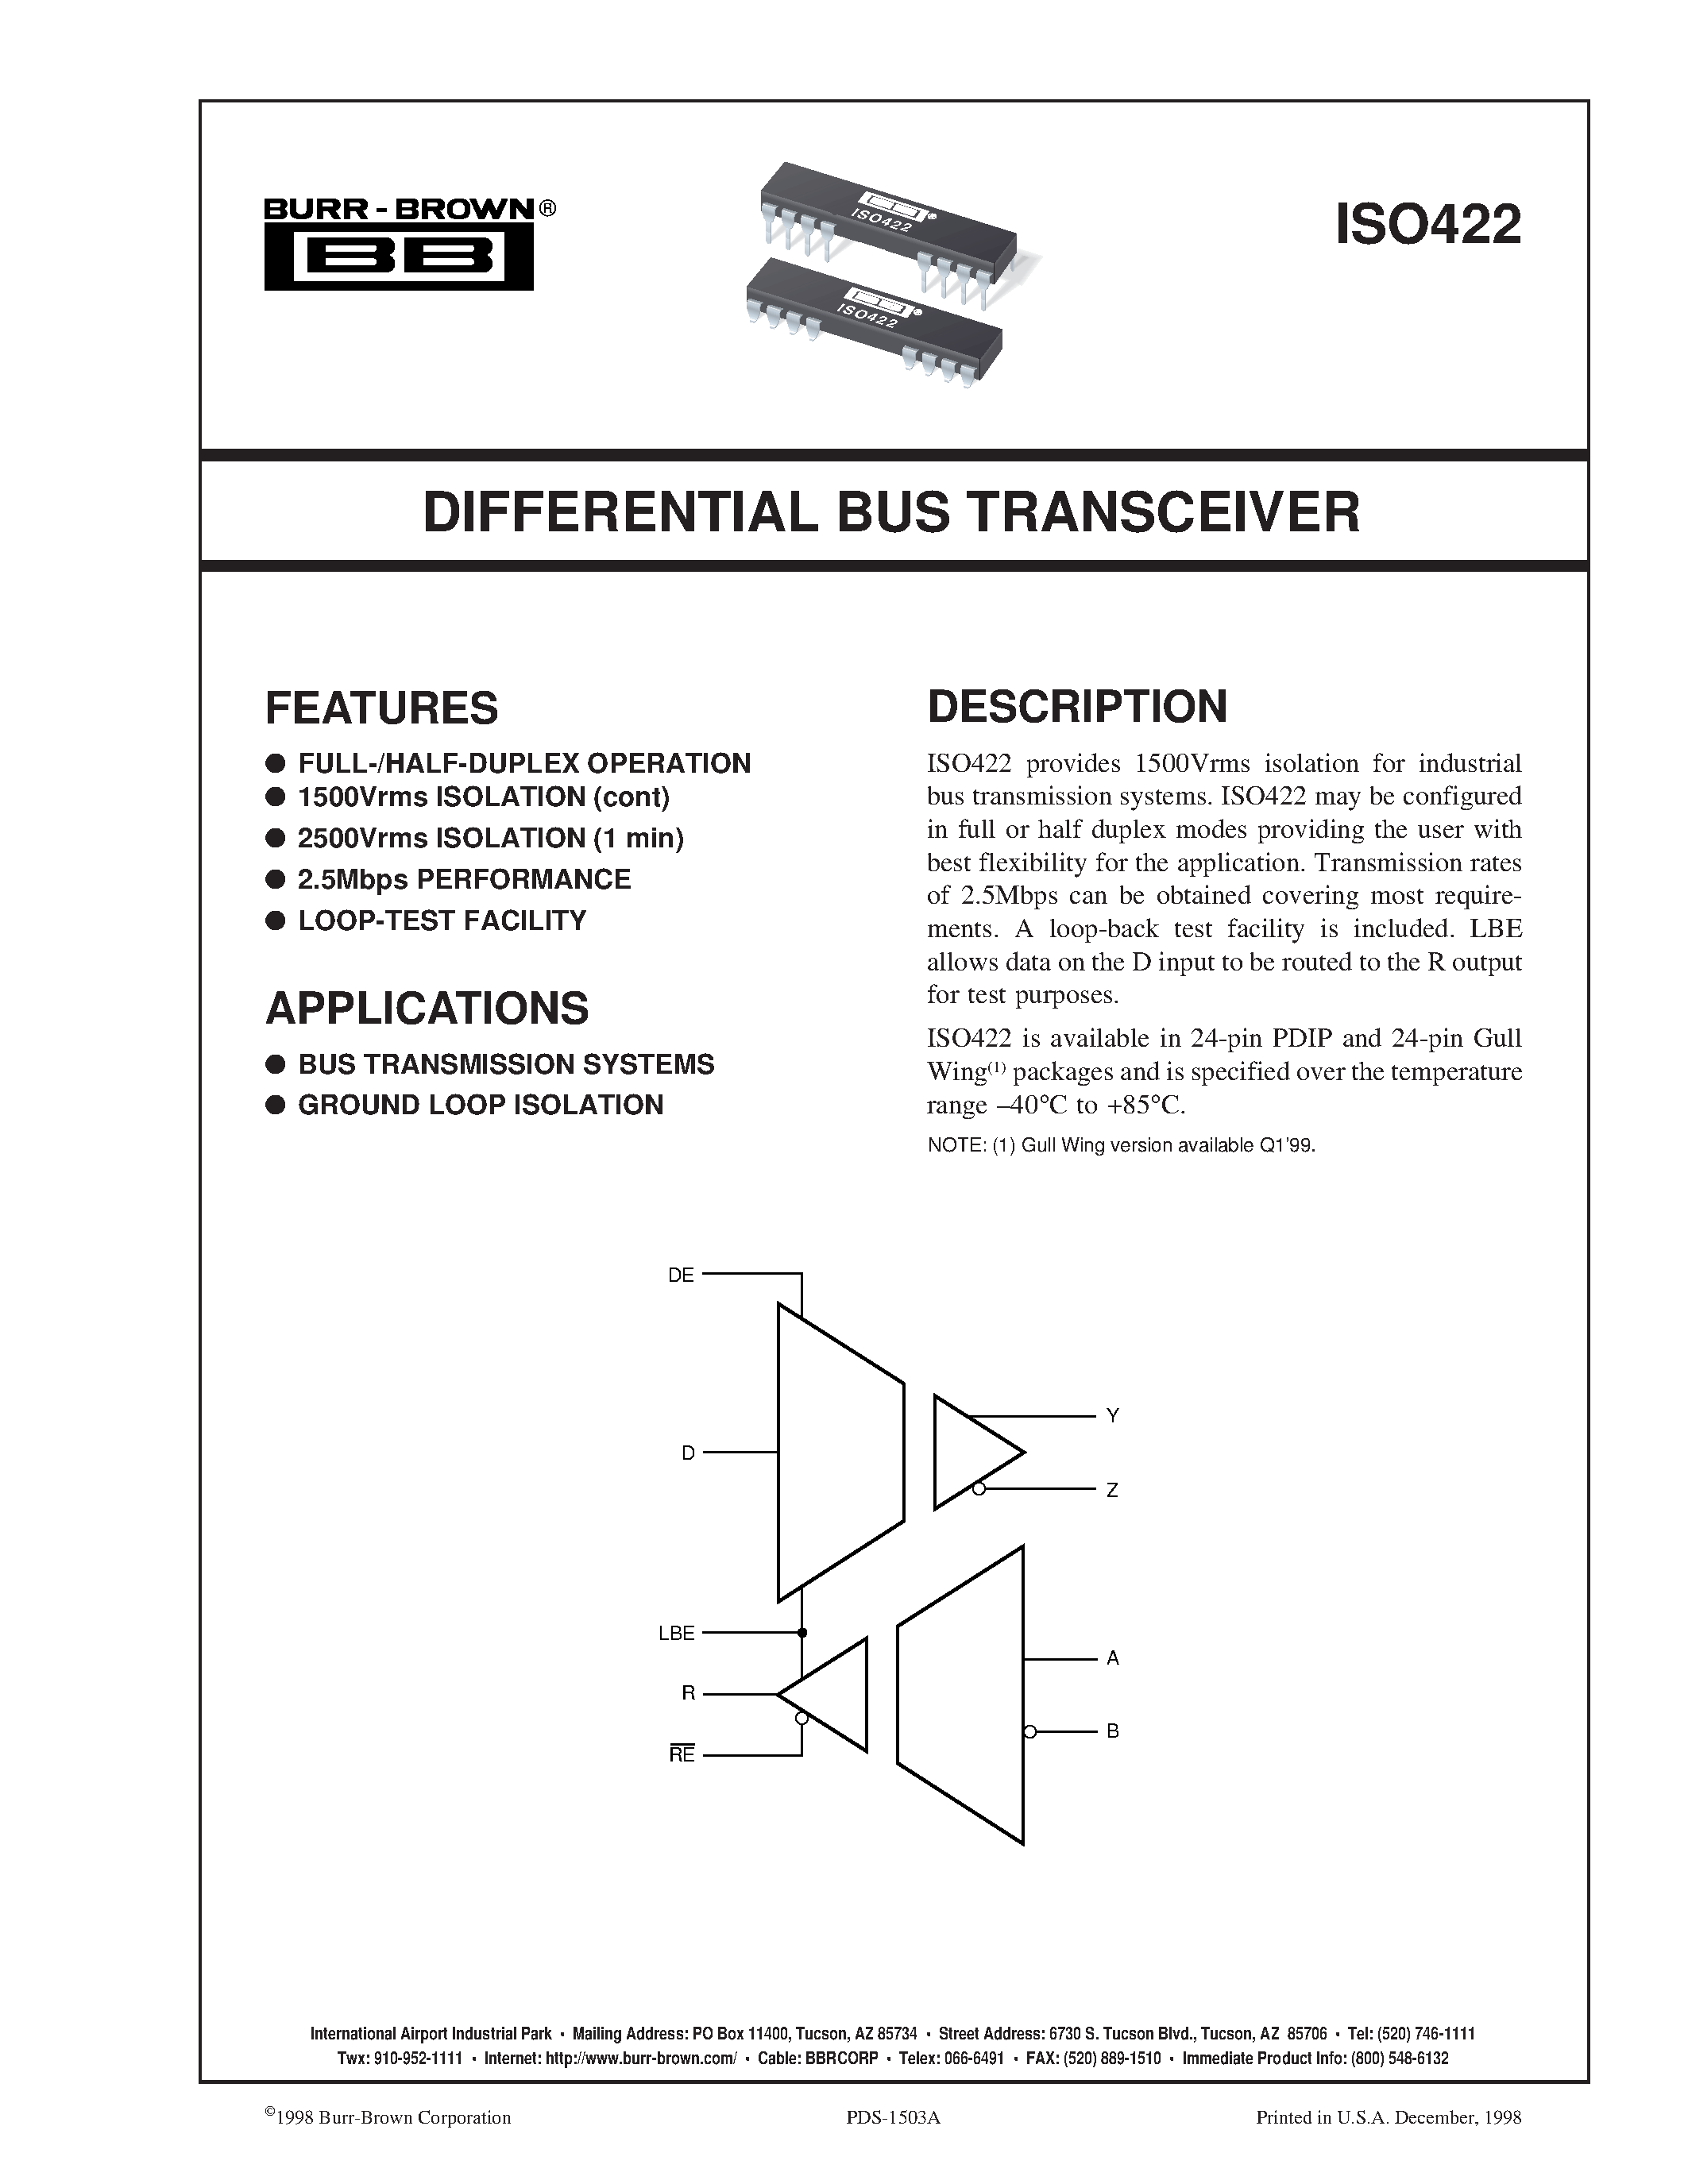 Даташит ISO422P-U(1) - DIFFERENTIAL BUS TRANSCEIVER страница 1